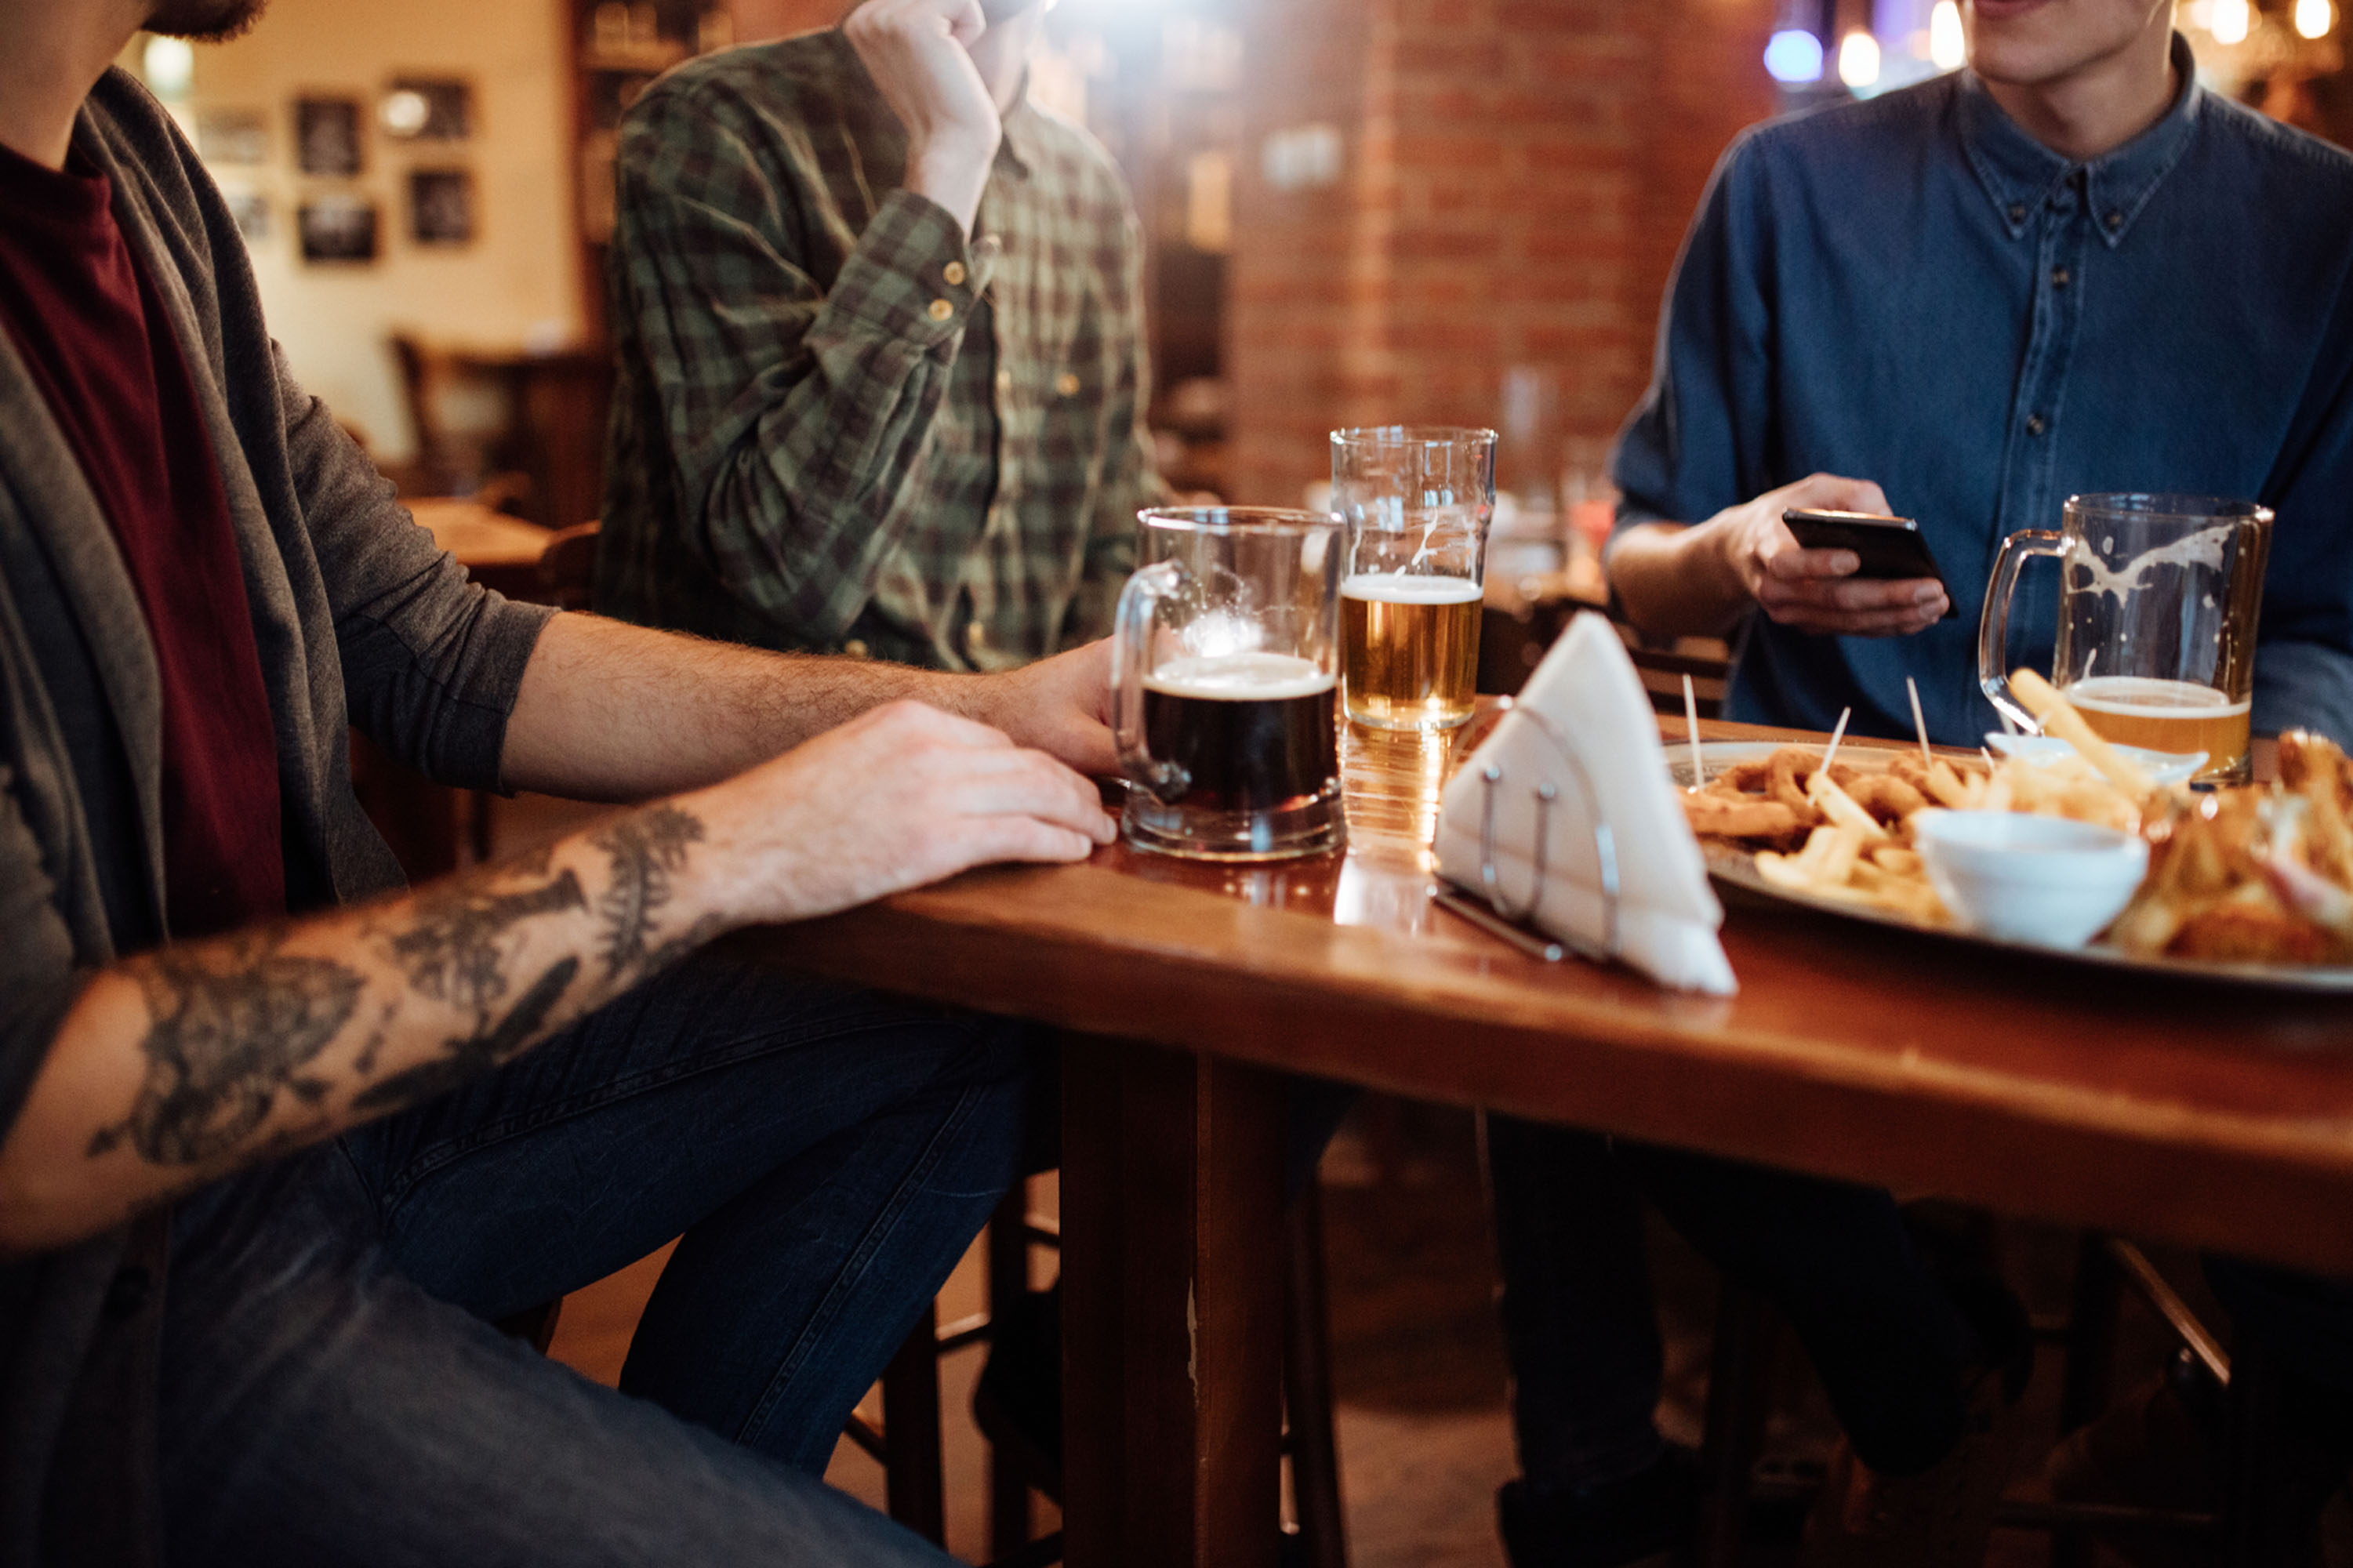 Guys at Pub Drinking Beer and Looking at Smartphone